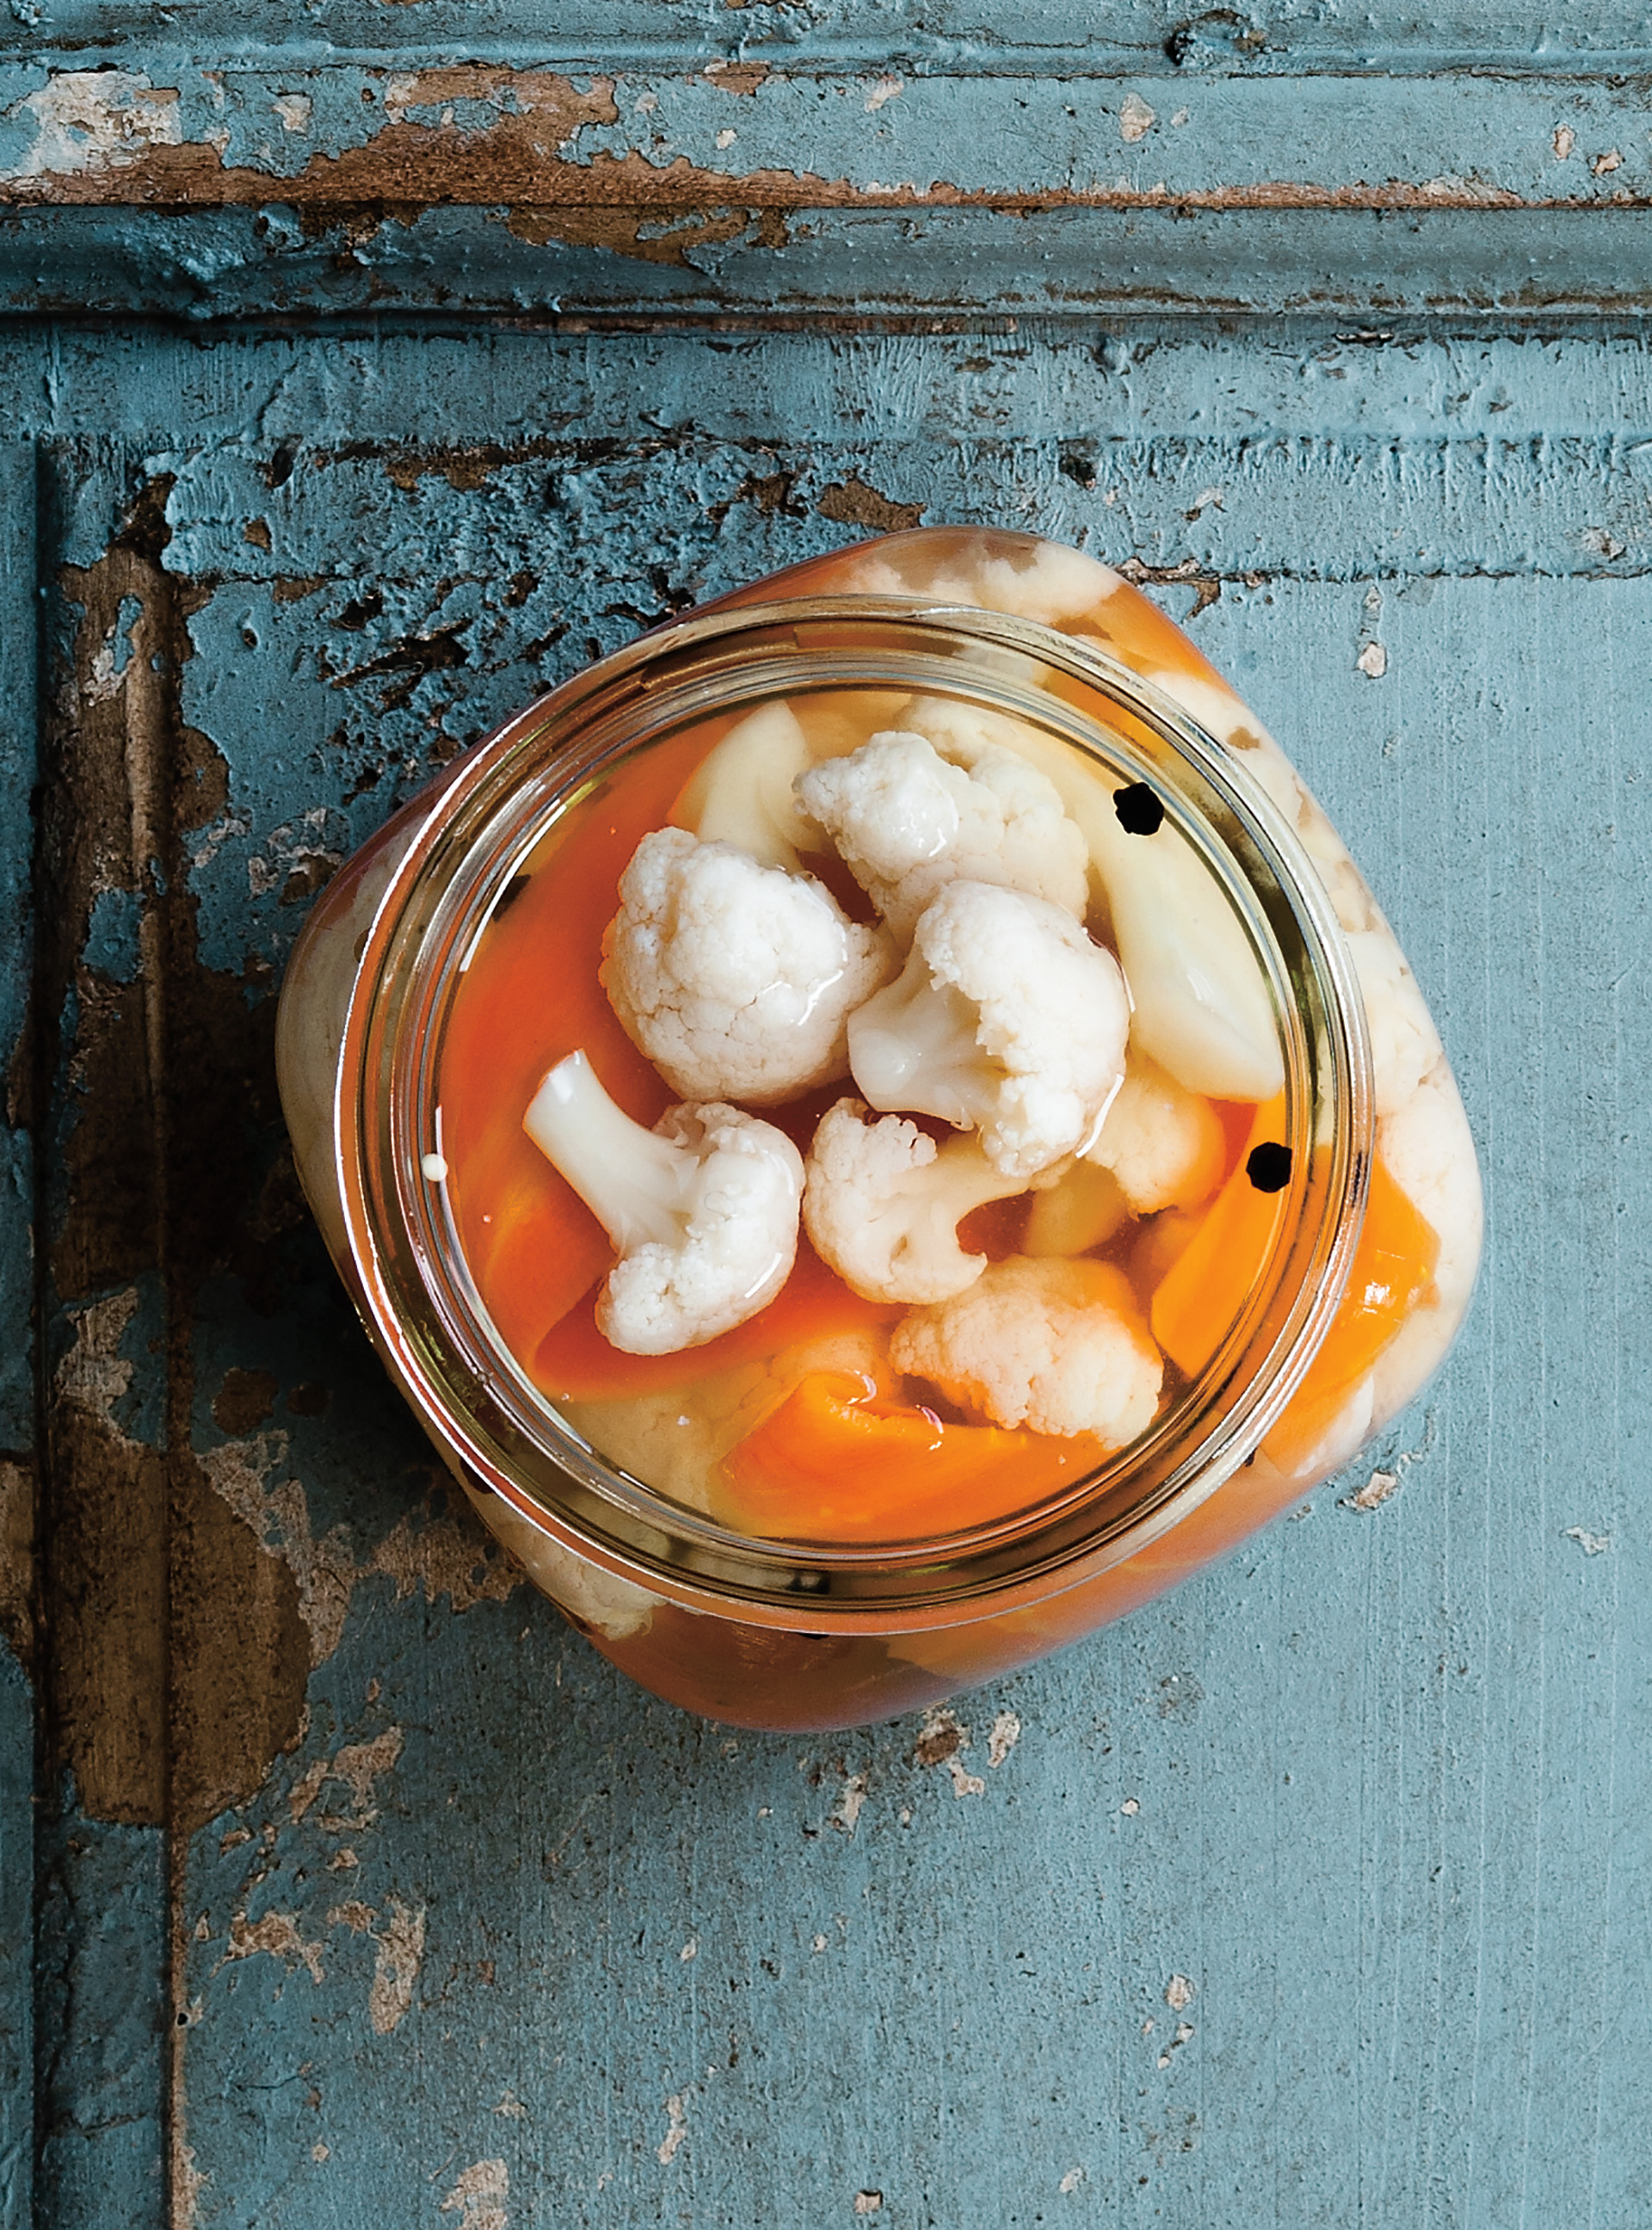 Pickled Cauliflower and Carrots